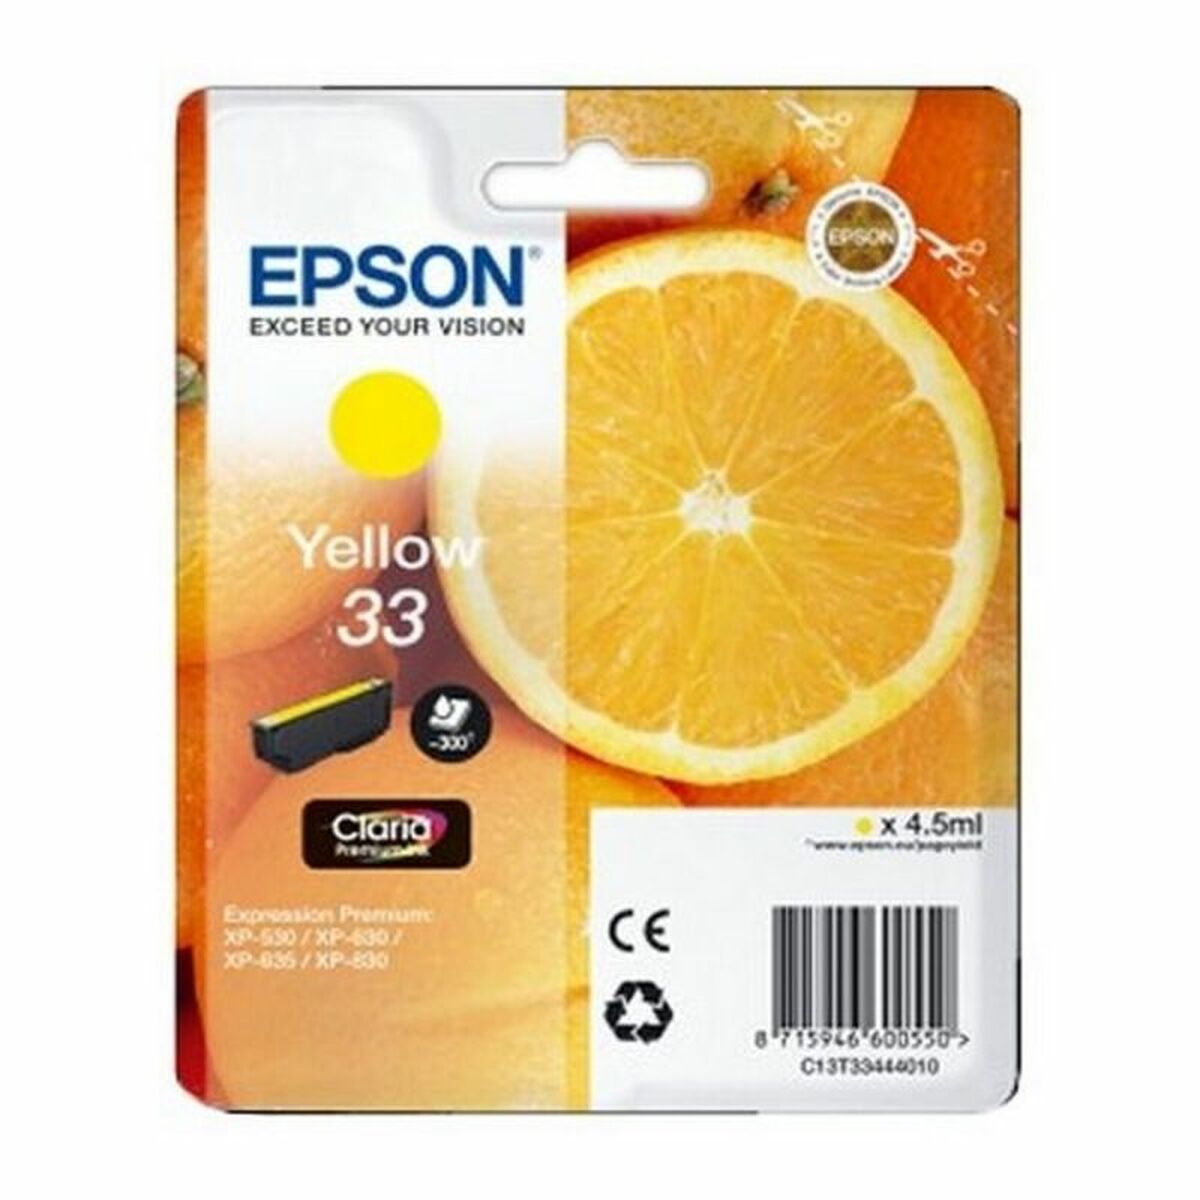 Compatible Ink Cartridge Epson T33, Epson, Computing, Printers and accessories, compatible-ink-cartridge-epson-t33, Brand_Epson, category-reference-2609, category-reference-2642, category-reference-2874, category-reference-t-19685, category-reference-t-19911, category-reference-t-21377, category-reference-t-25688, Colour_Cyan, Colour_Magenta, Colour_Yellow, Condition_NEW, office, Price_20 - 50, Teleworking, RiotNook